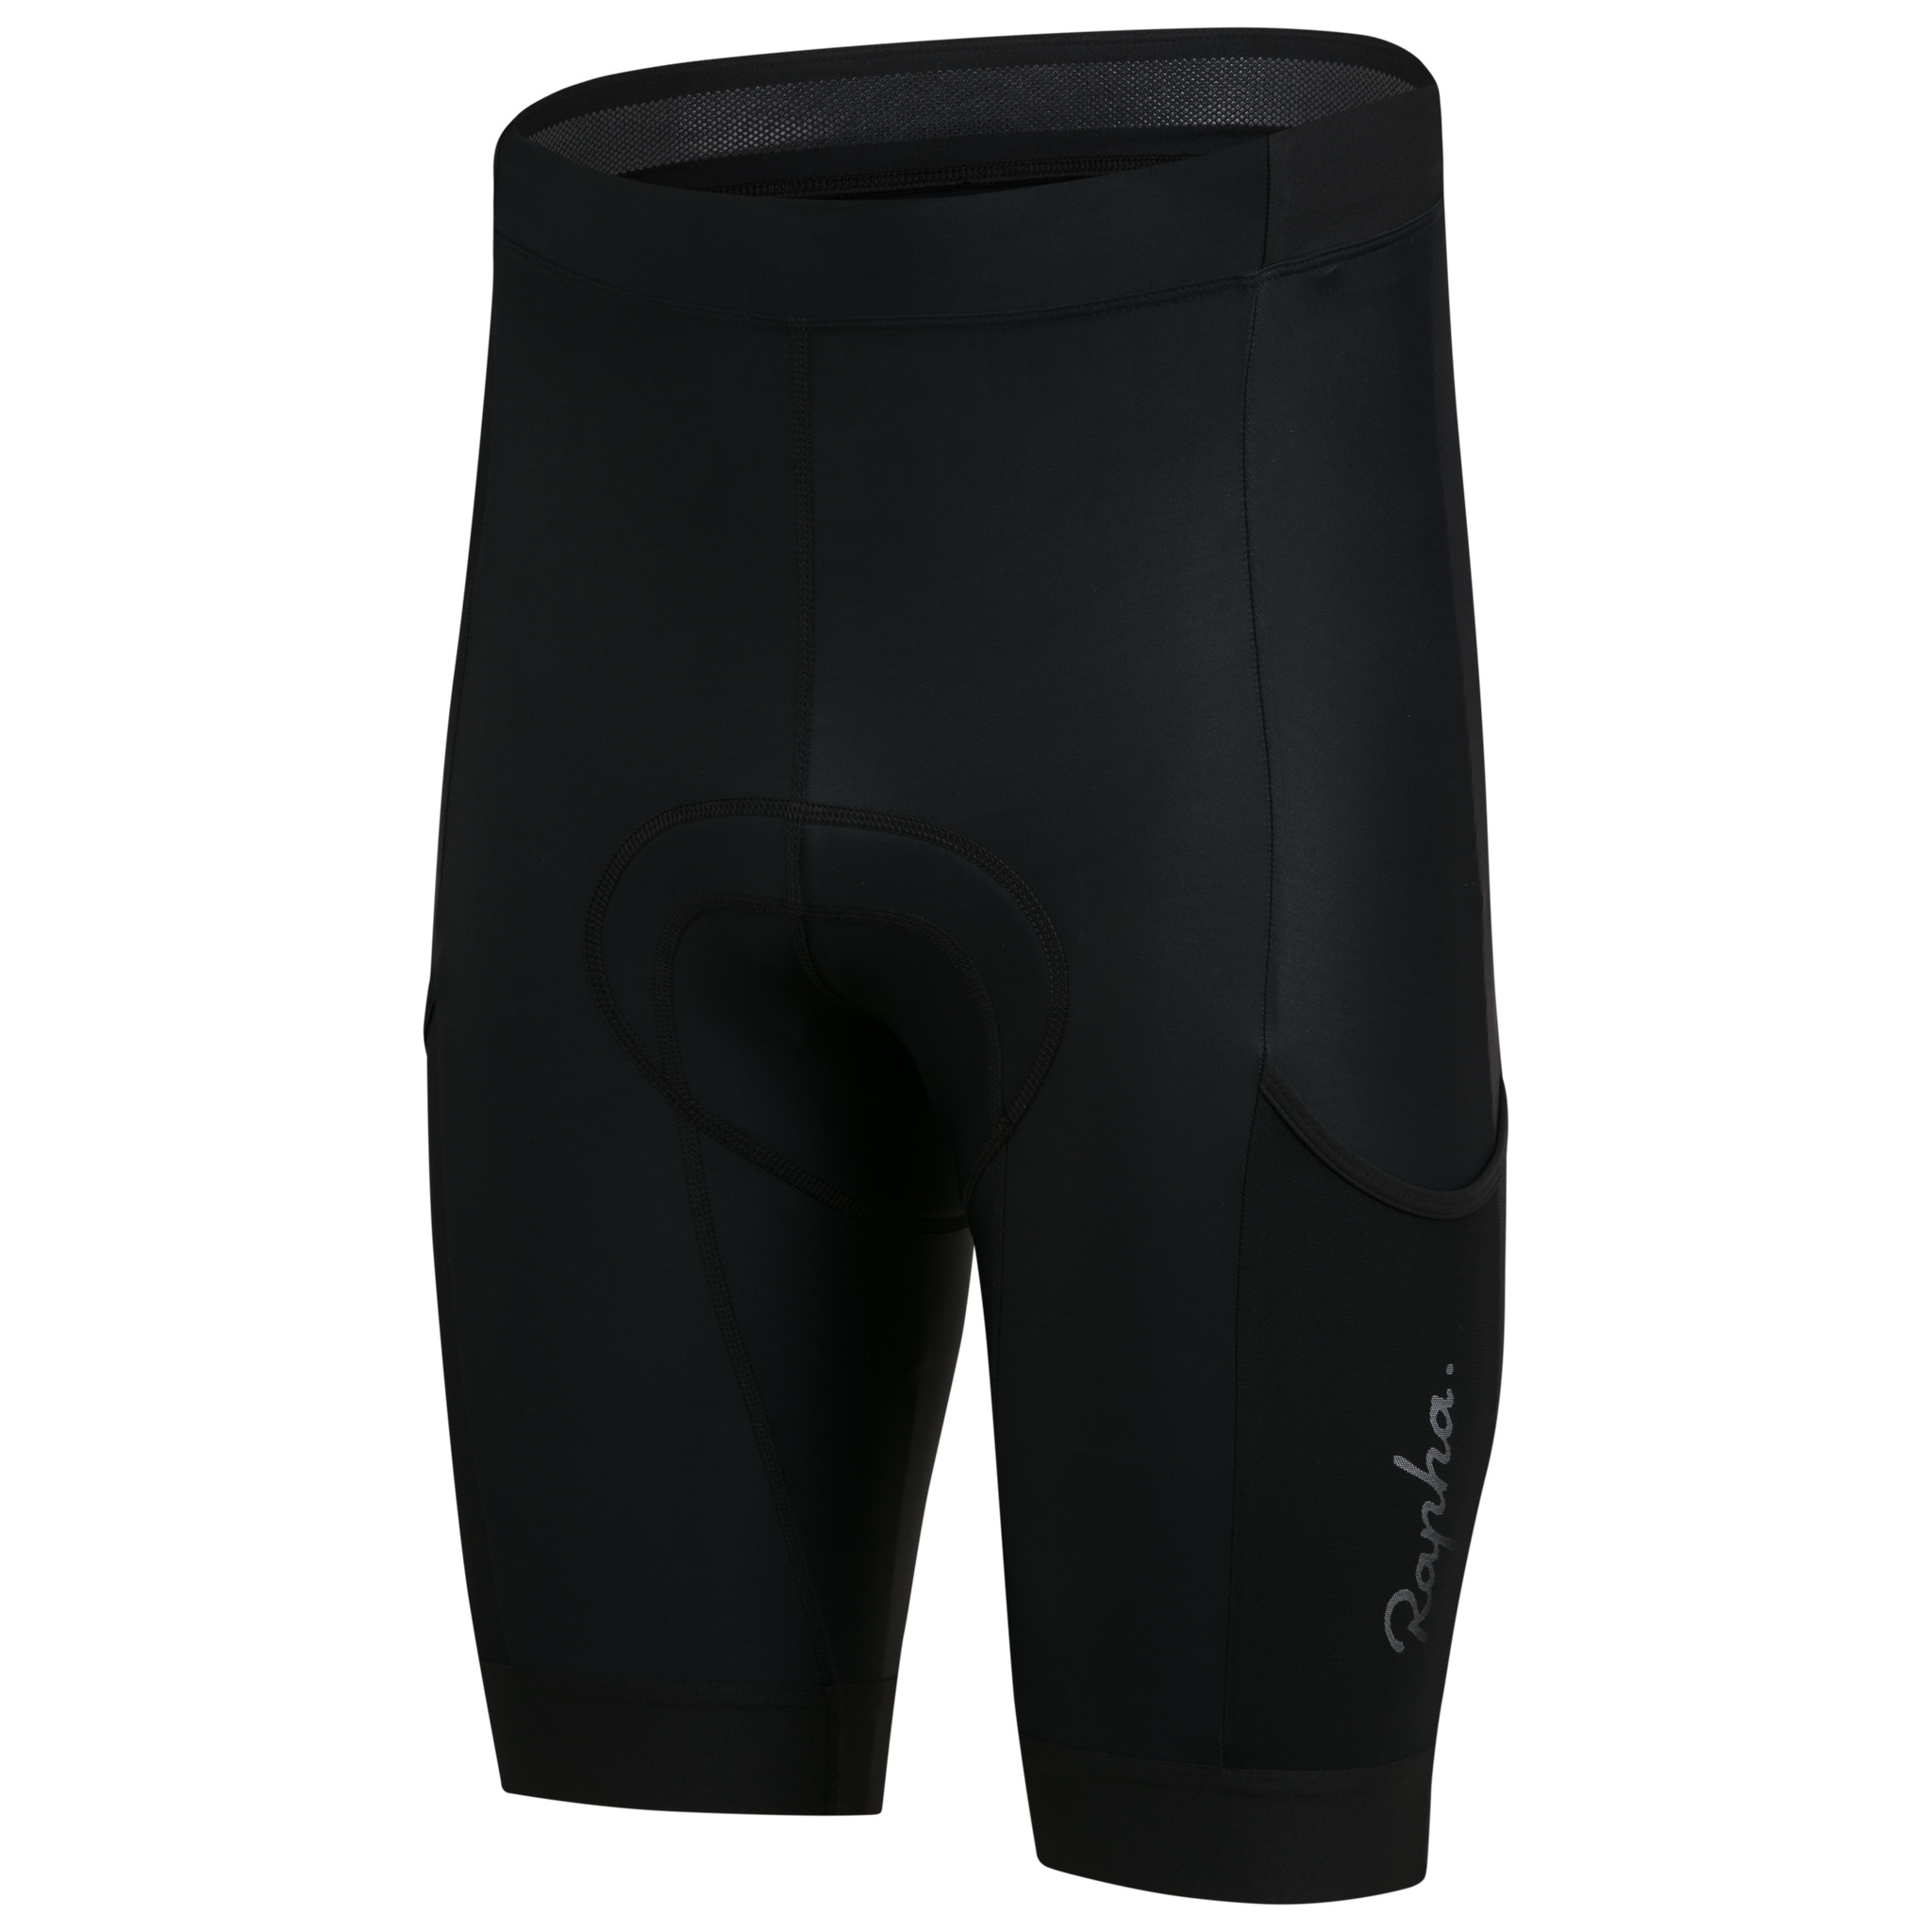 Men's Cycling Shorts with Pockets | Rapha